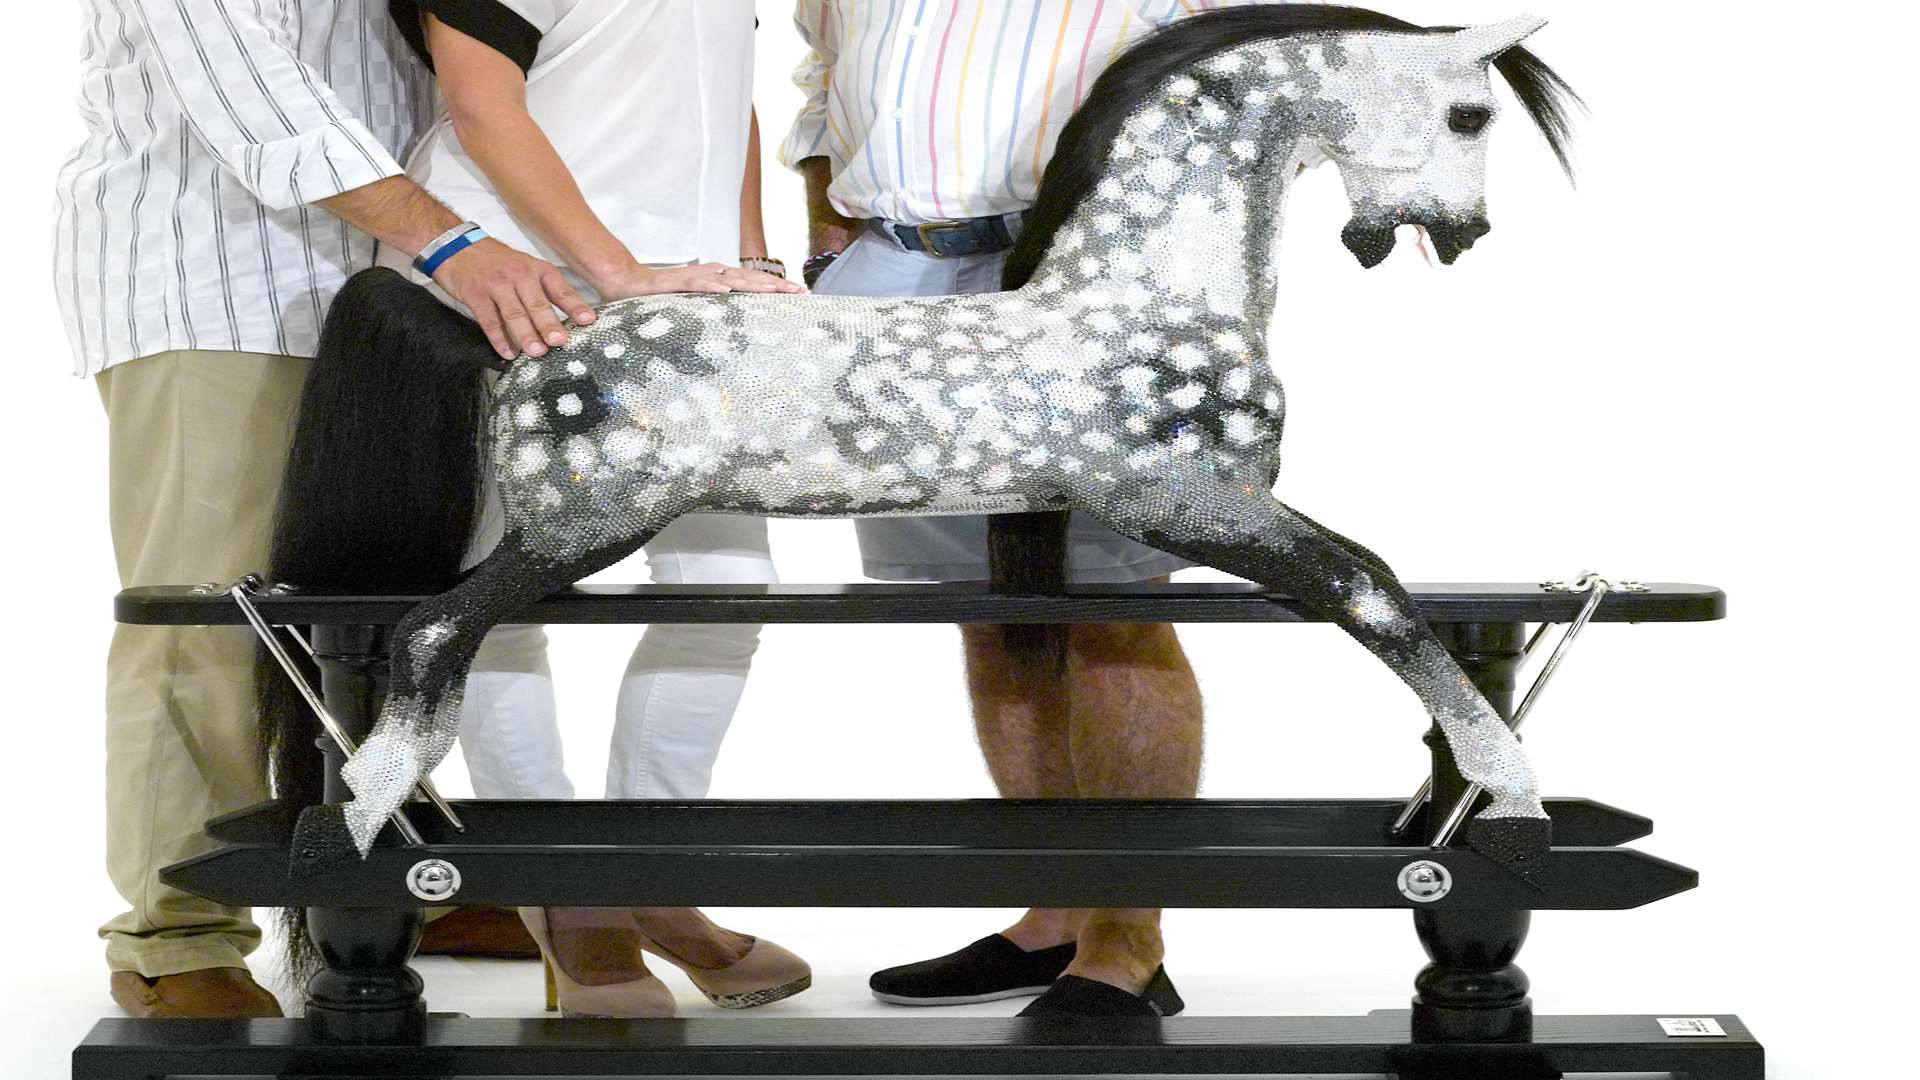 Crystal the rocking horse